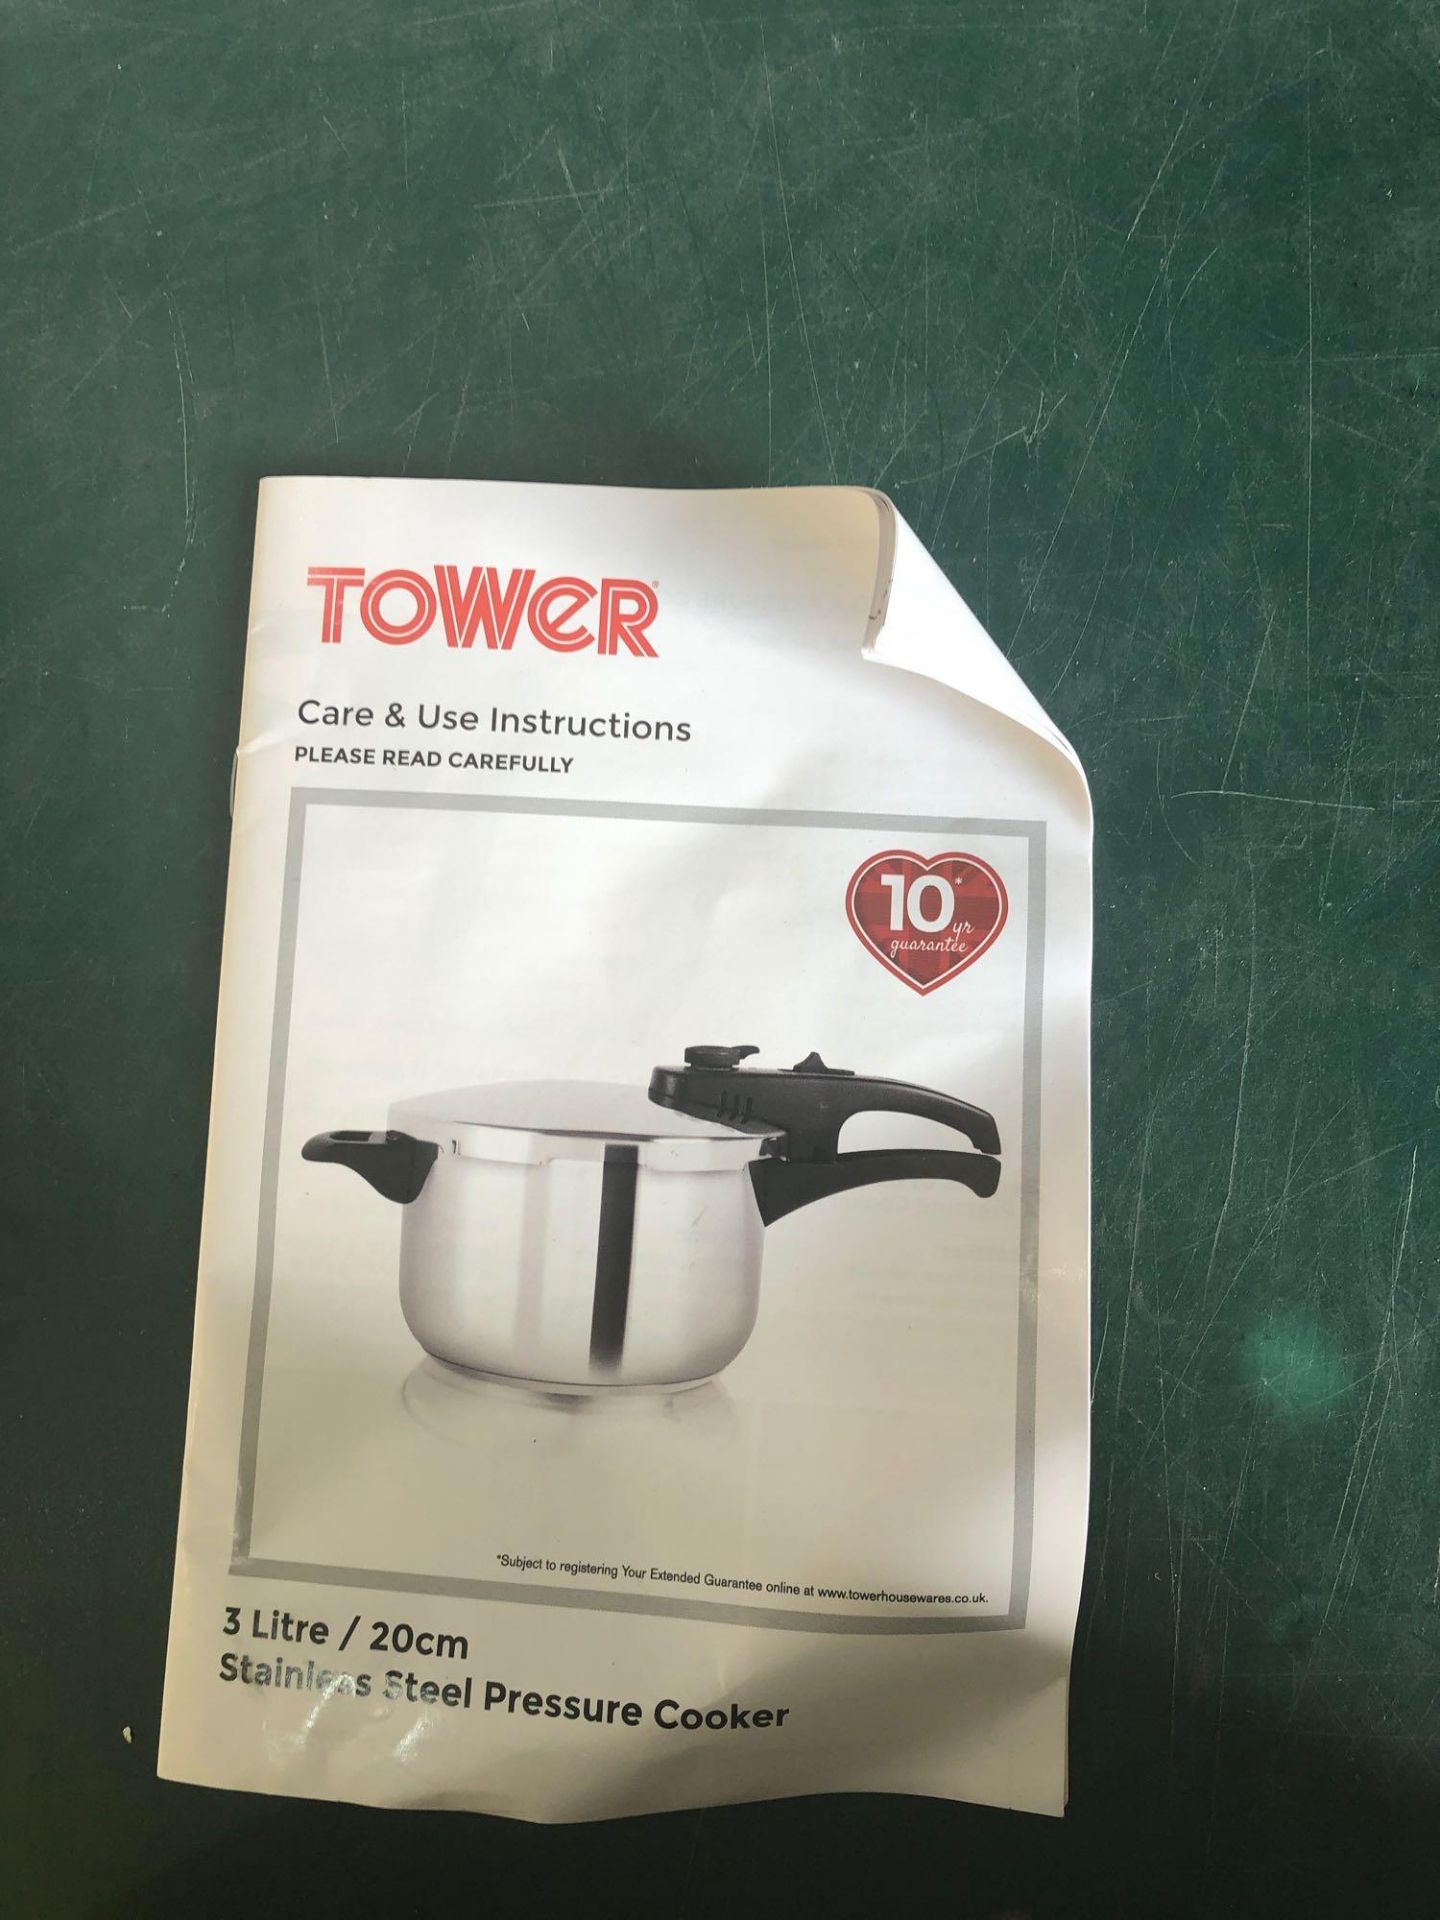 Tower 3 Litre Stainless Steel Pressure Cooker £34.00 RRP - Image 5 of 5